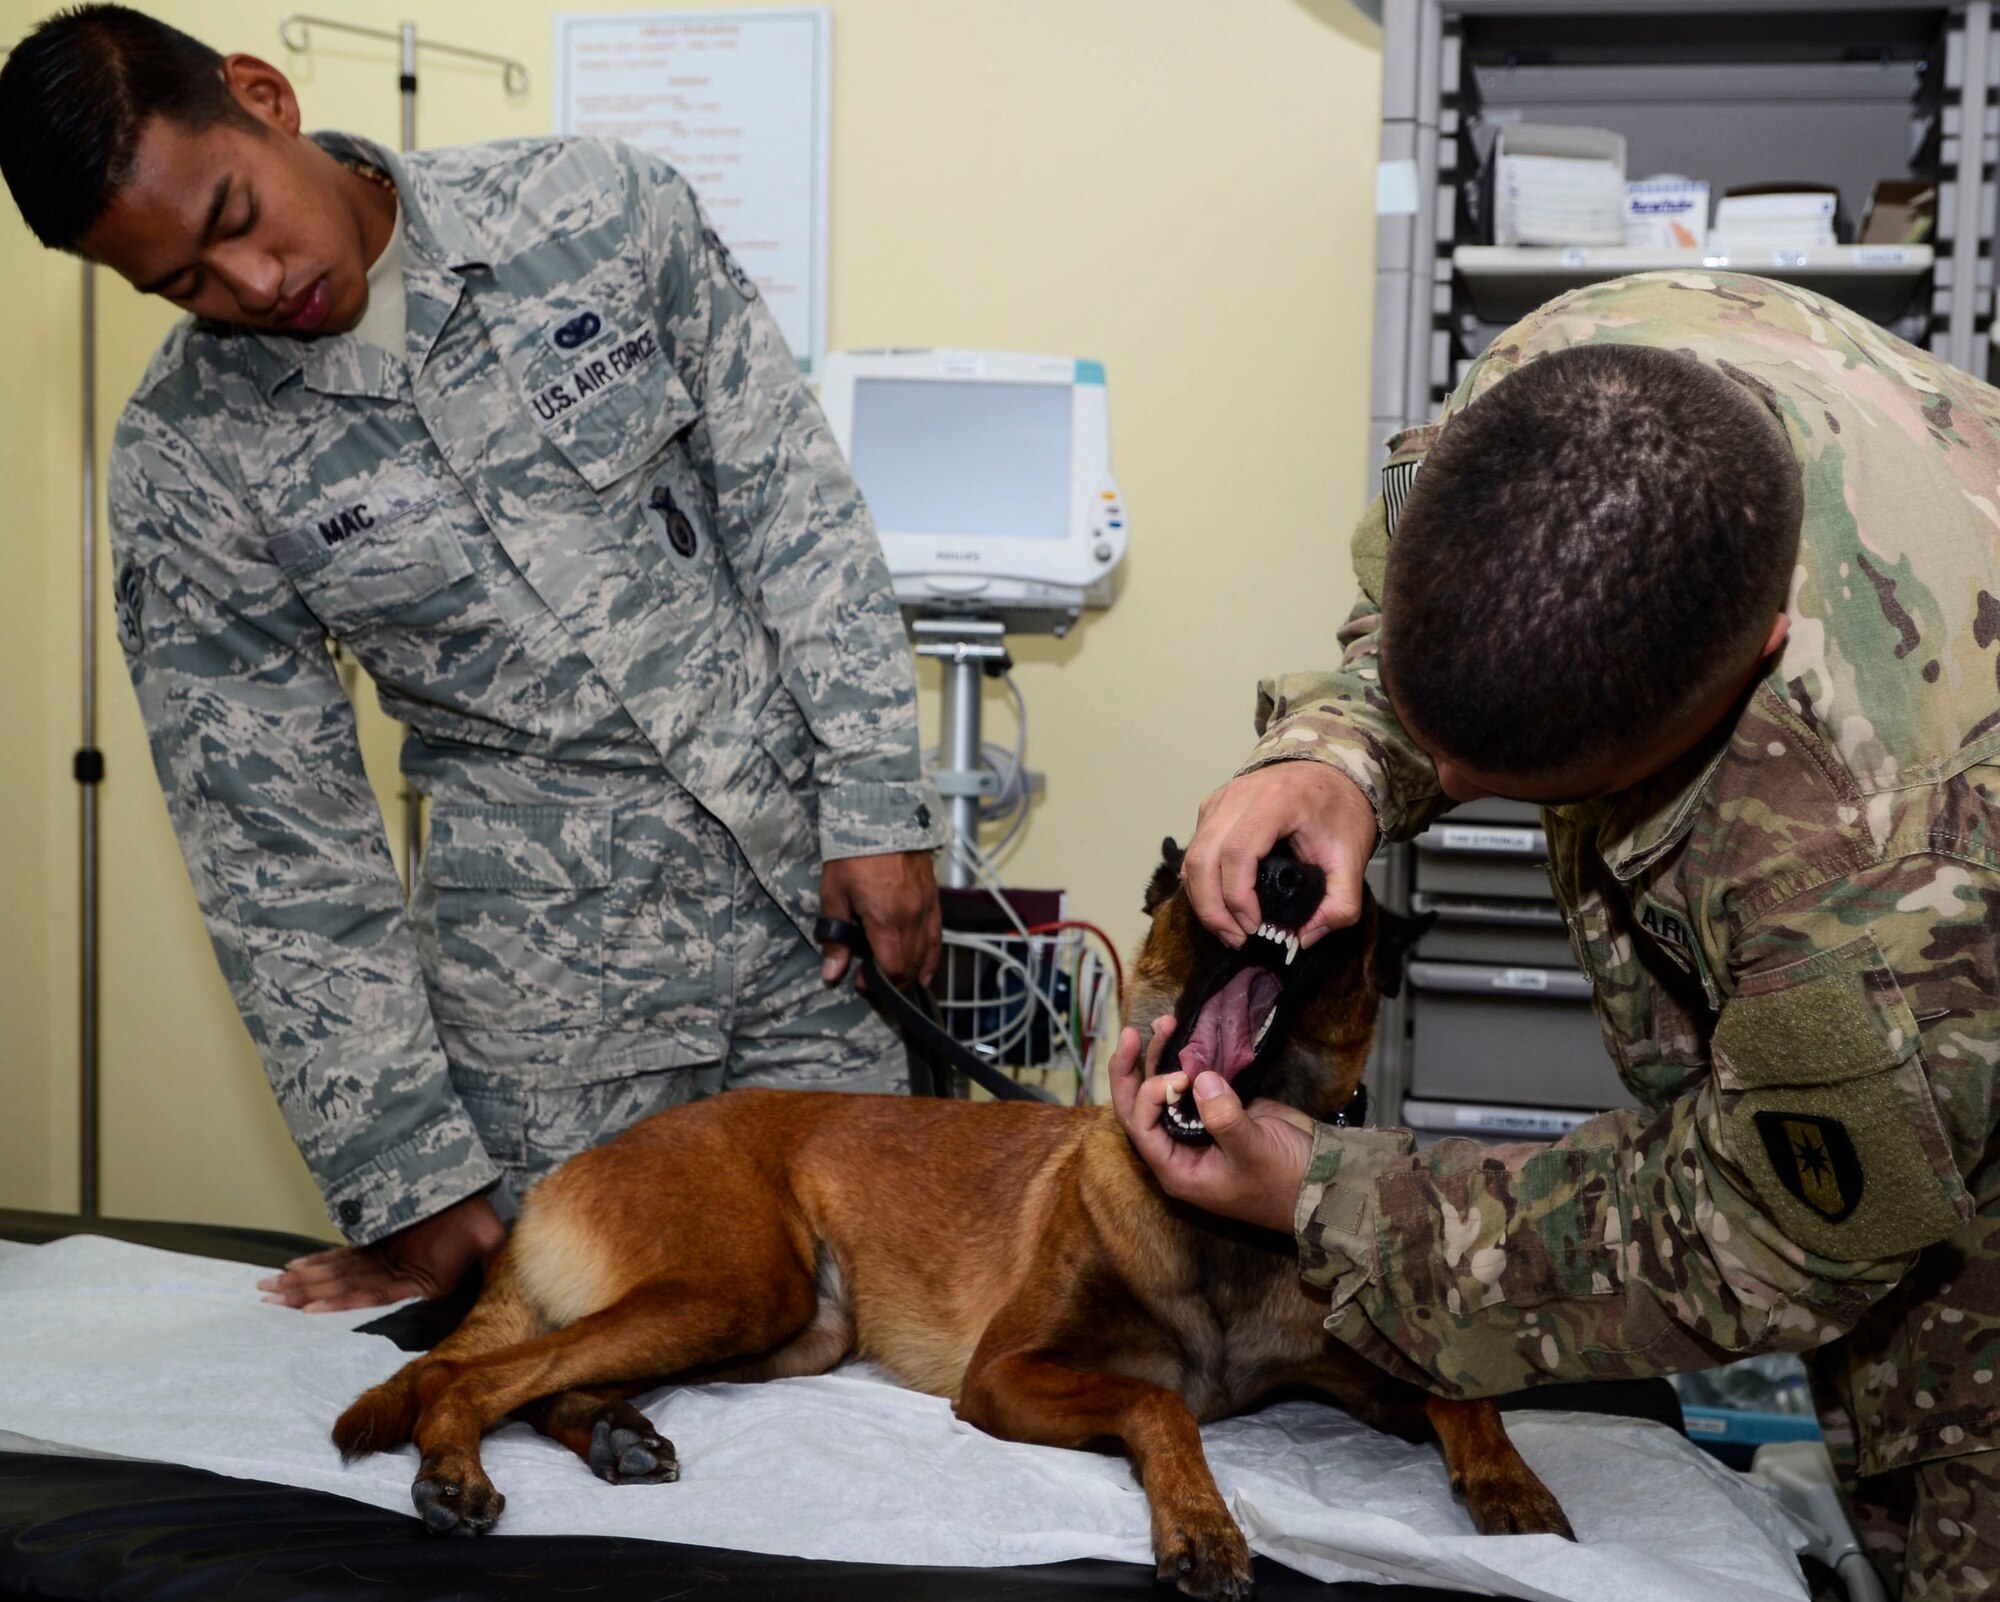 U.S. Air Force Senior Airman Adrian Mac, 386 Expeditionary Security Forces Squadron Military Working Dog handler, watches U.S. Army Specialist Nathan Creel, 463rd Military Detachment Veterinary Service animal technician, do an exam on GGreta, USAF 386 ESFS MWD, during medical emergency training at an undisclosed location in Southwest Asia, Sept. 12, 2015. The veterinary service team travel through the area of responsibility, teaching medical personnel techniques to stabilize MWDs until more advanced care is available. (U.S. Air Force photo by Senior Airman Racheal E. Watson/Released)